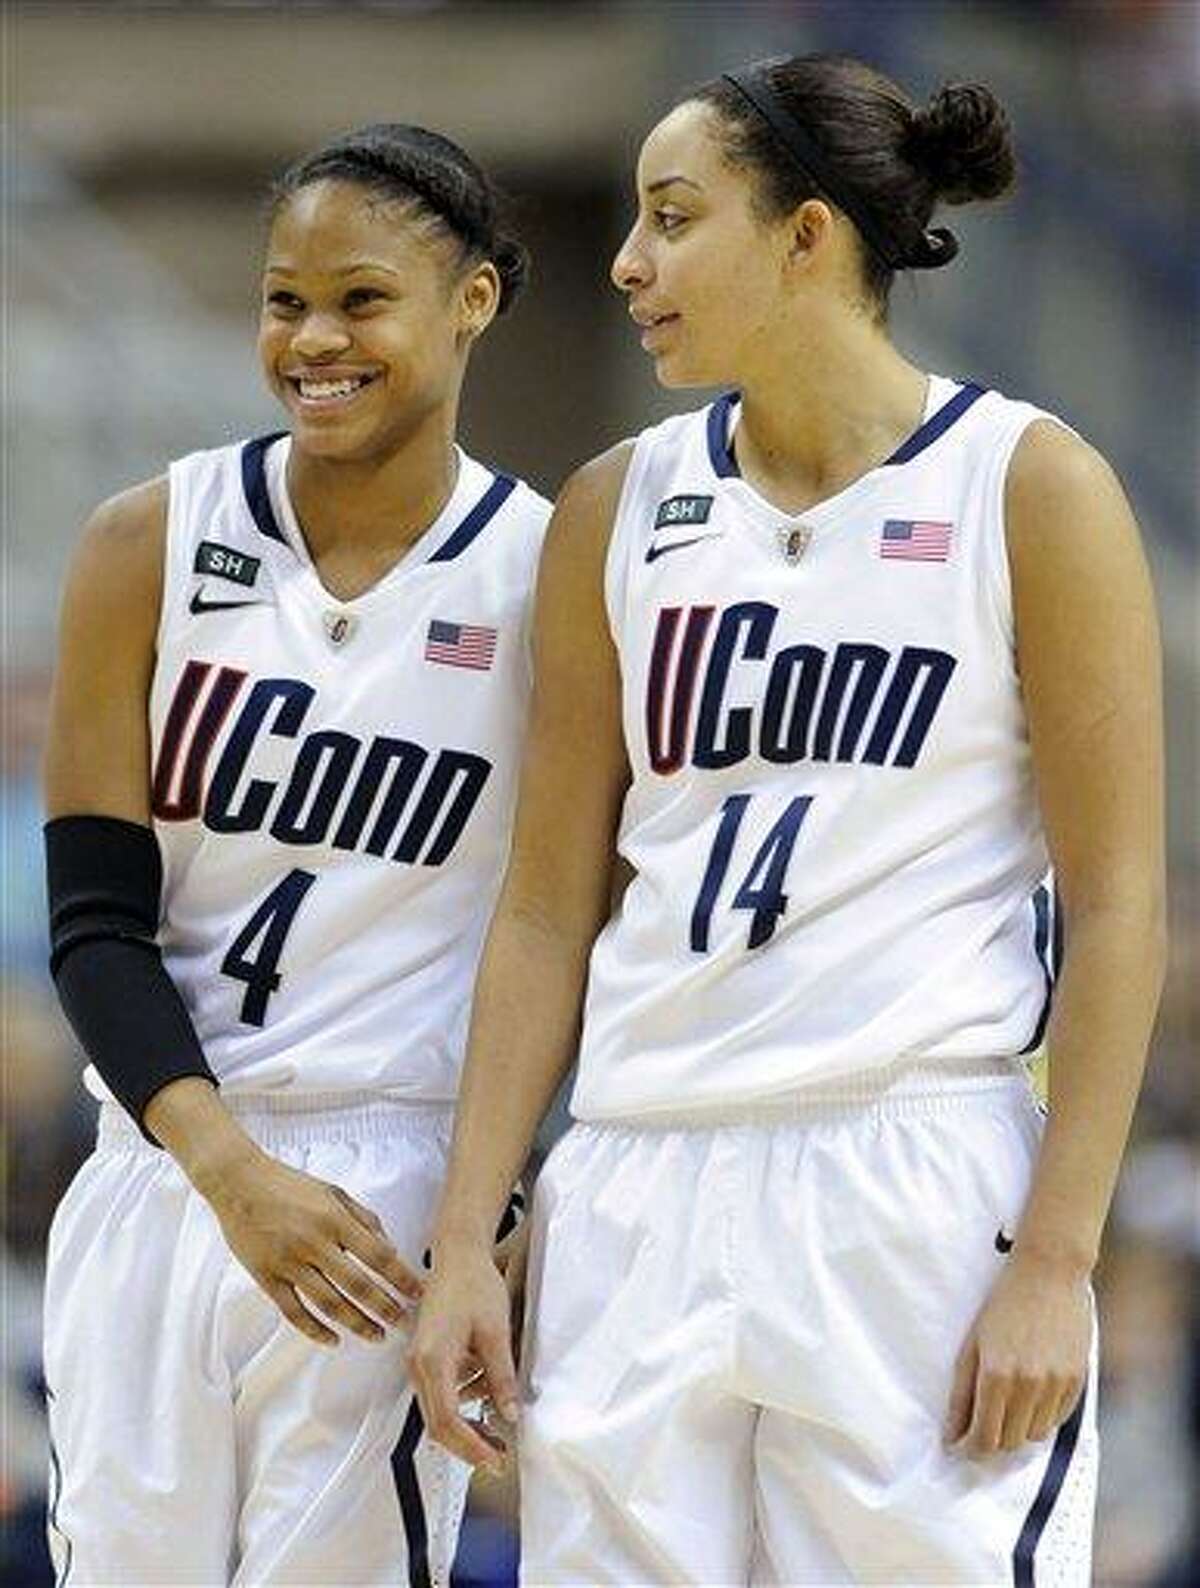 Connecticut's Moriah Jefferson, left, and Bria Hartley smile late in the second half of their team's 94-37 victory over Marquette in an NCAA college basketball game in Storrs, Conn., Tuesday, Feb. 5, 2013. (AP Photo/Fred Beckham)